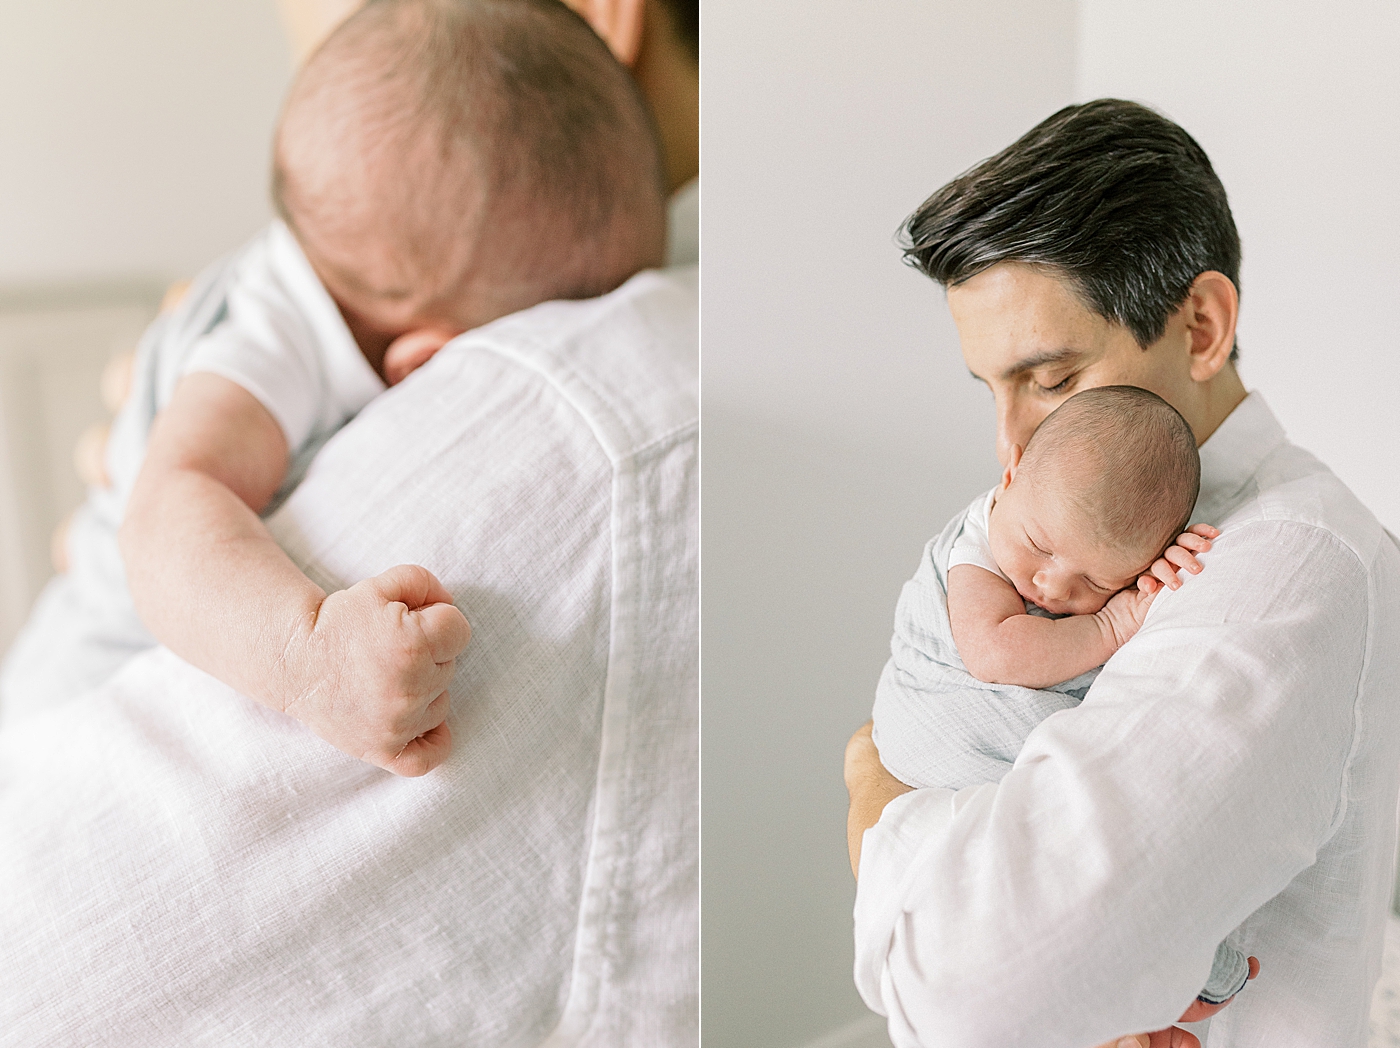 Details of baby on dad's shoulder during lifestyle newborn photos | Image by Caitlyn Motycka